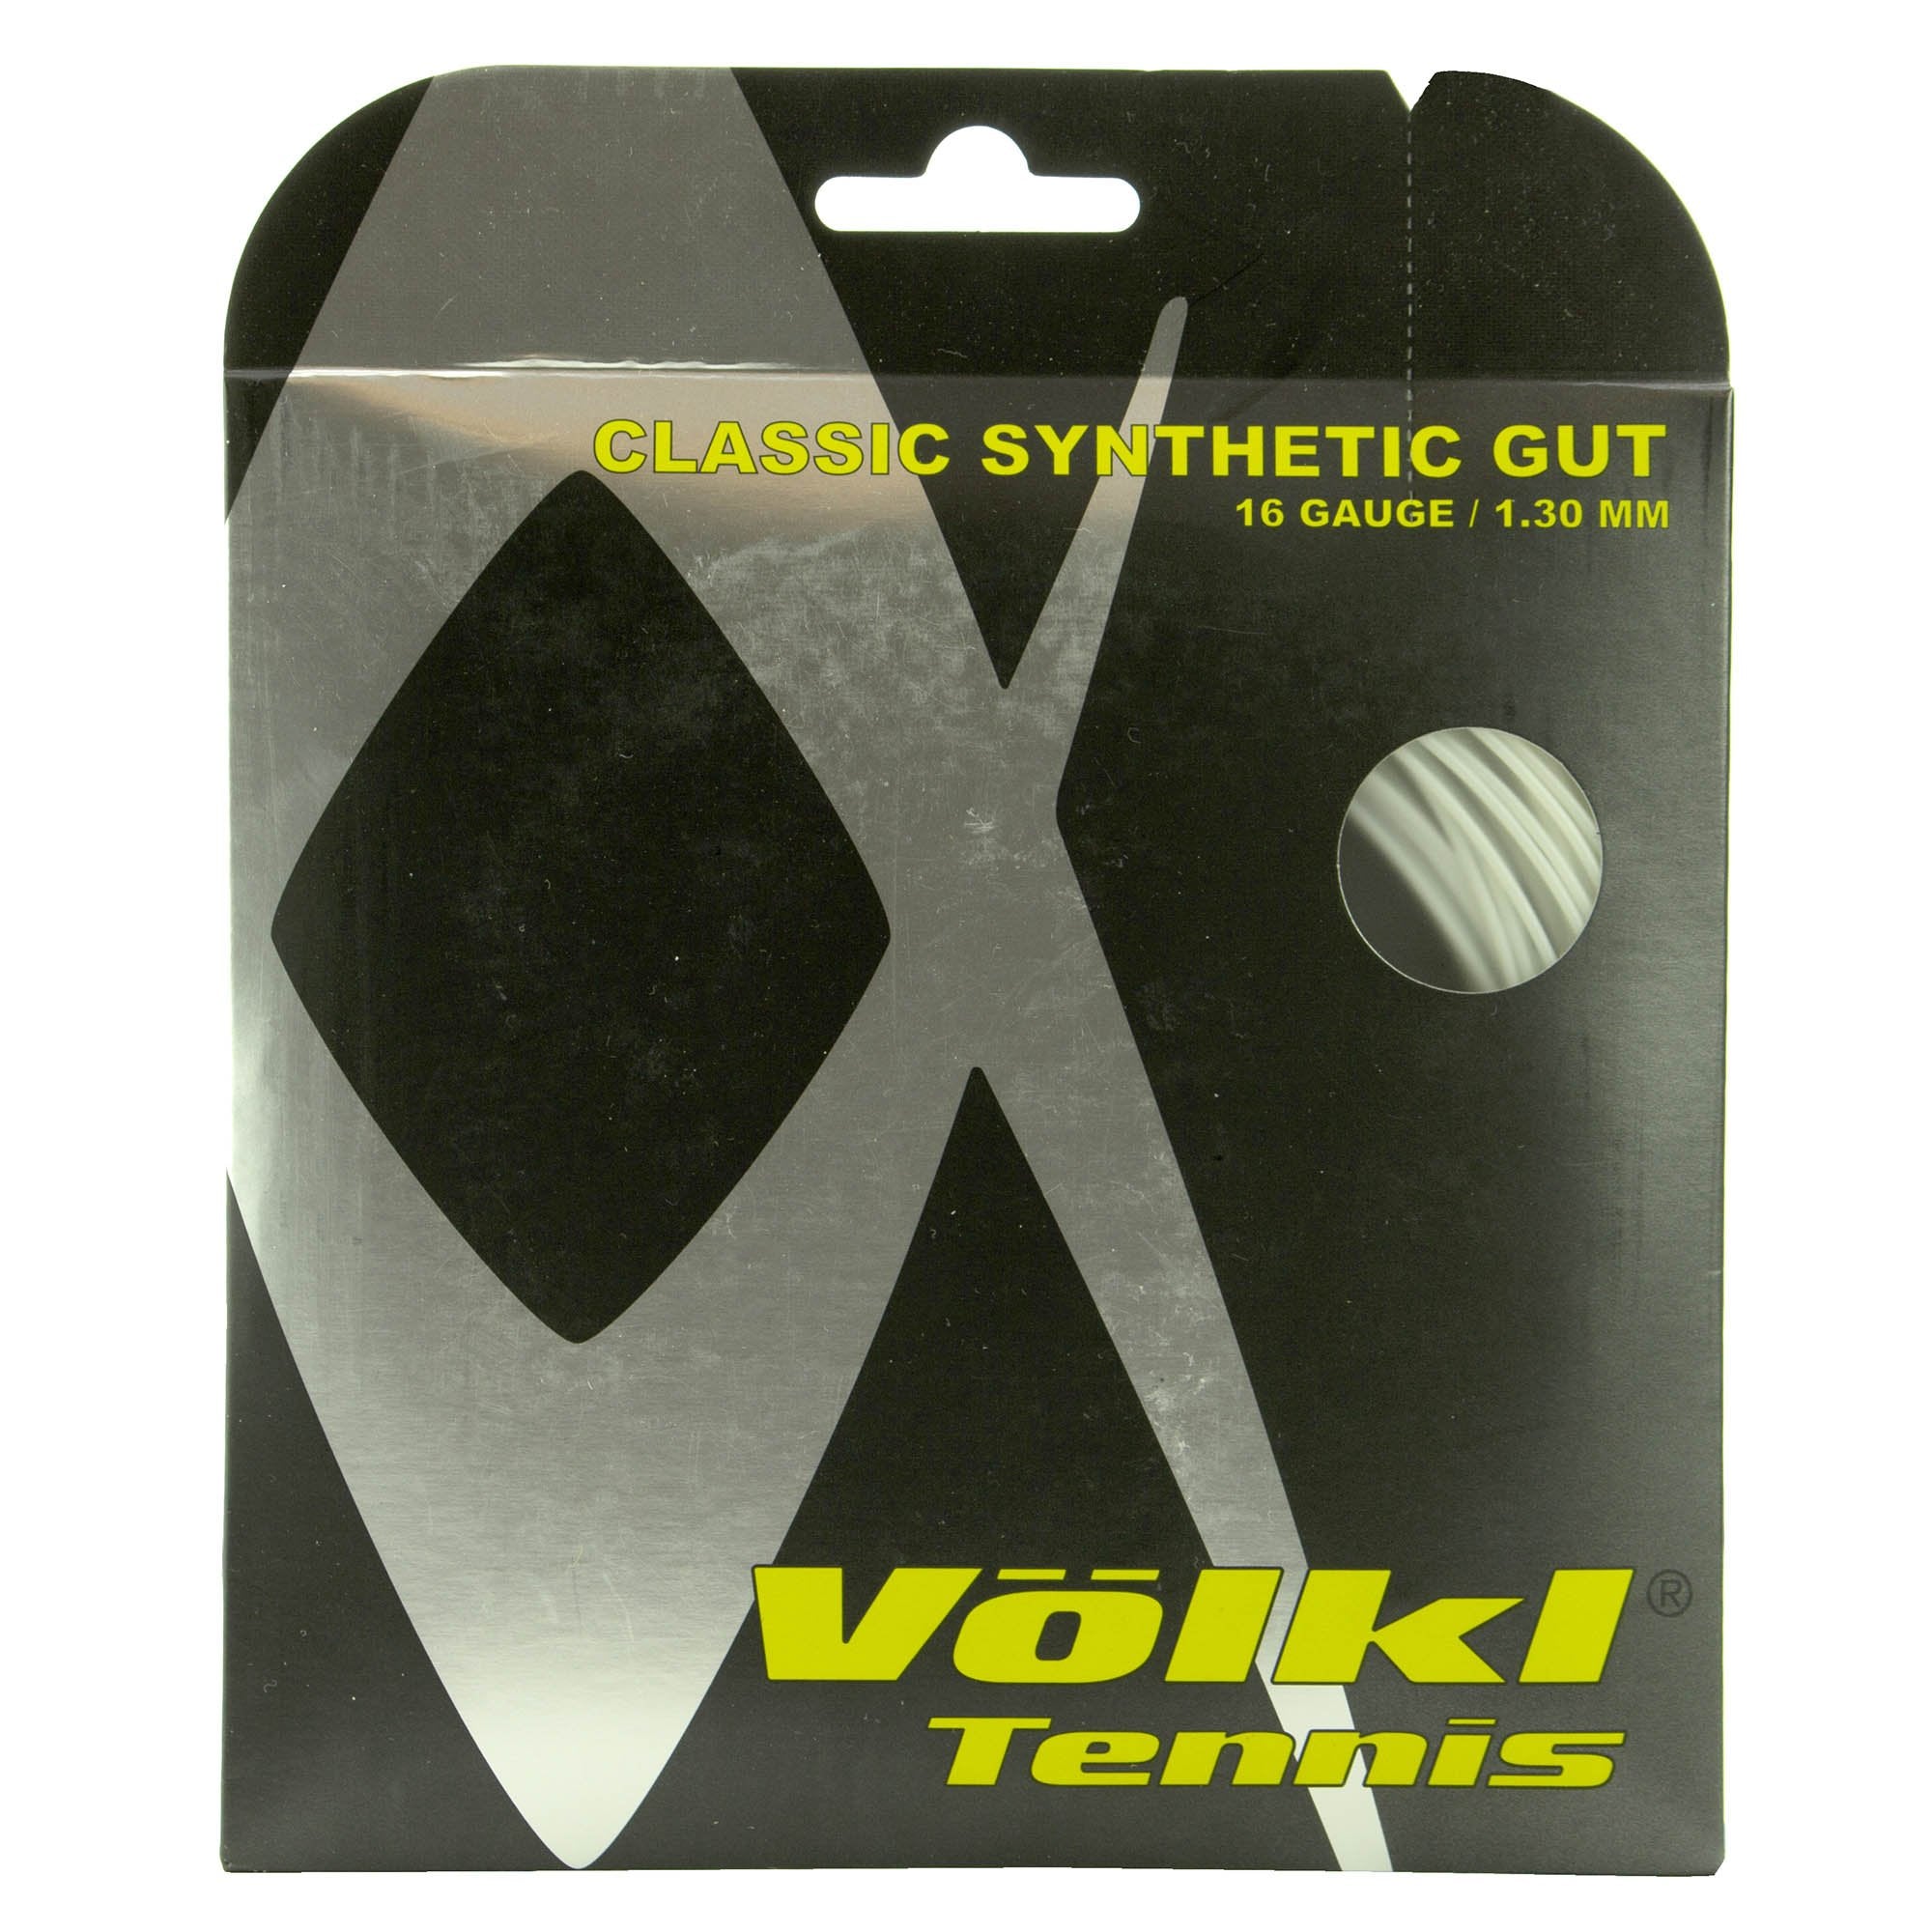 Volkl Classic Synthetic Gut Tennis String - 12m Set from Sweatband.com